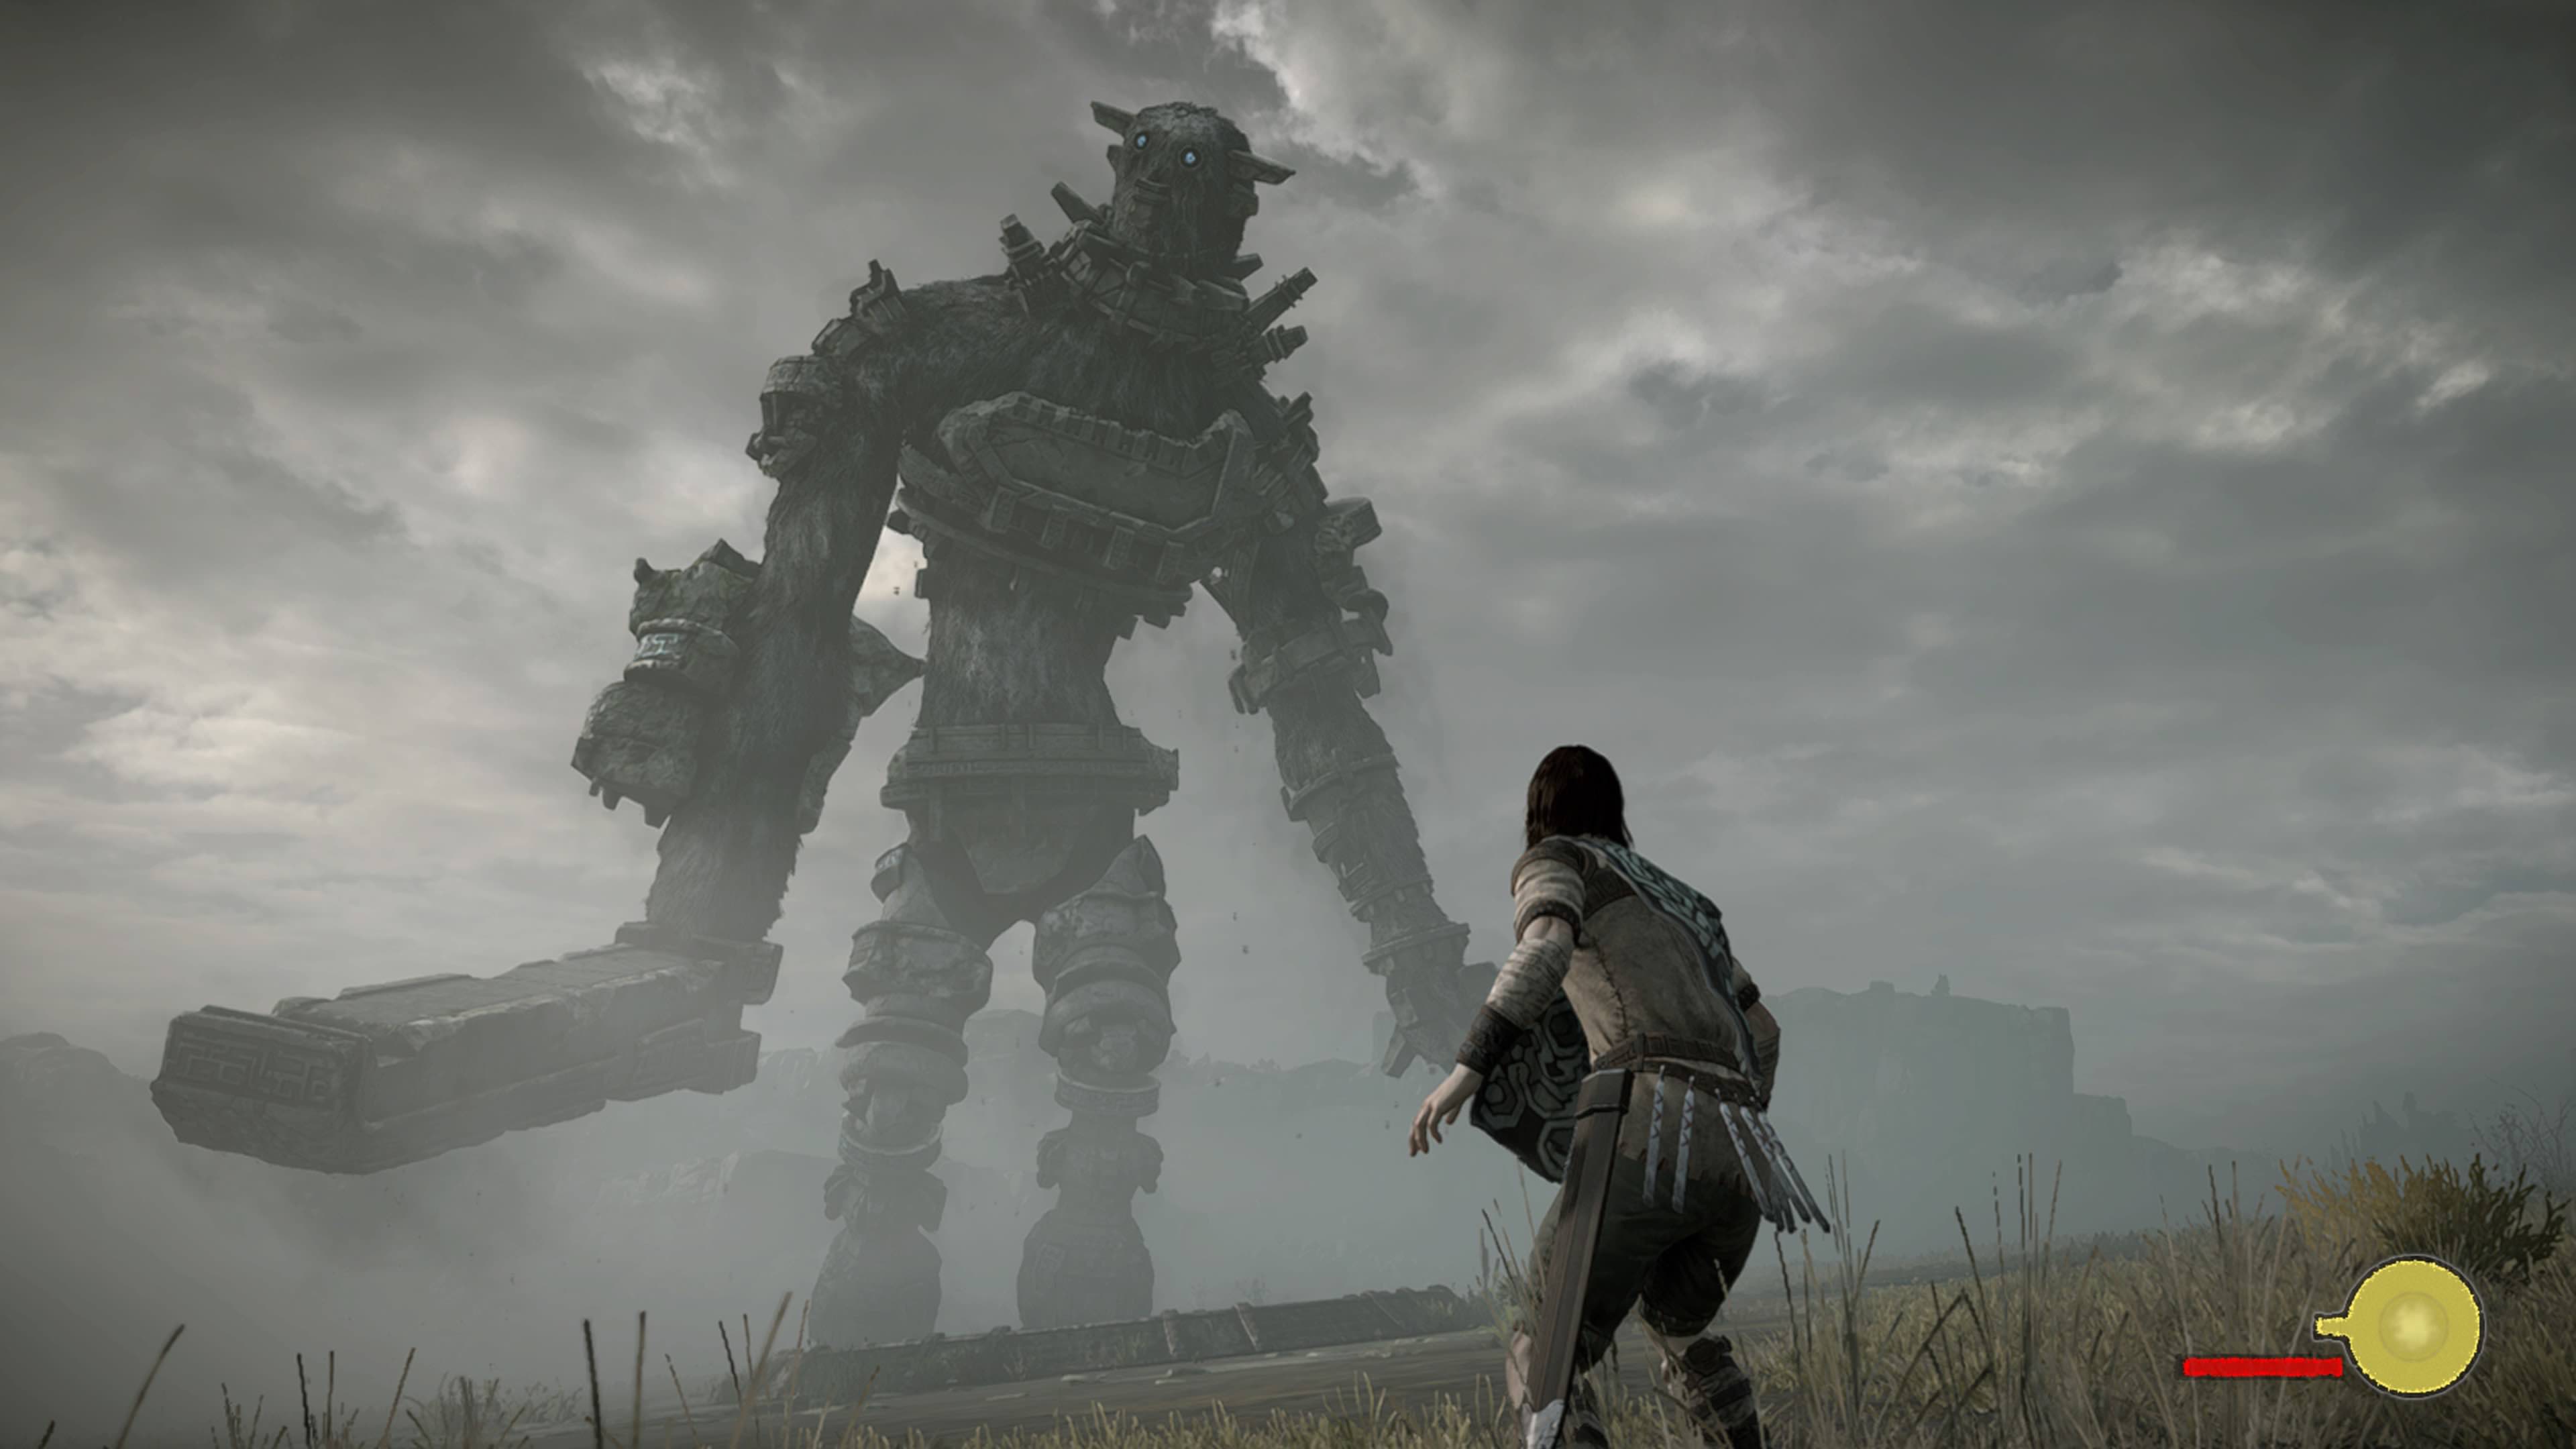 shadow of the colossus ps2 for android emulator